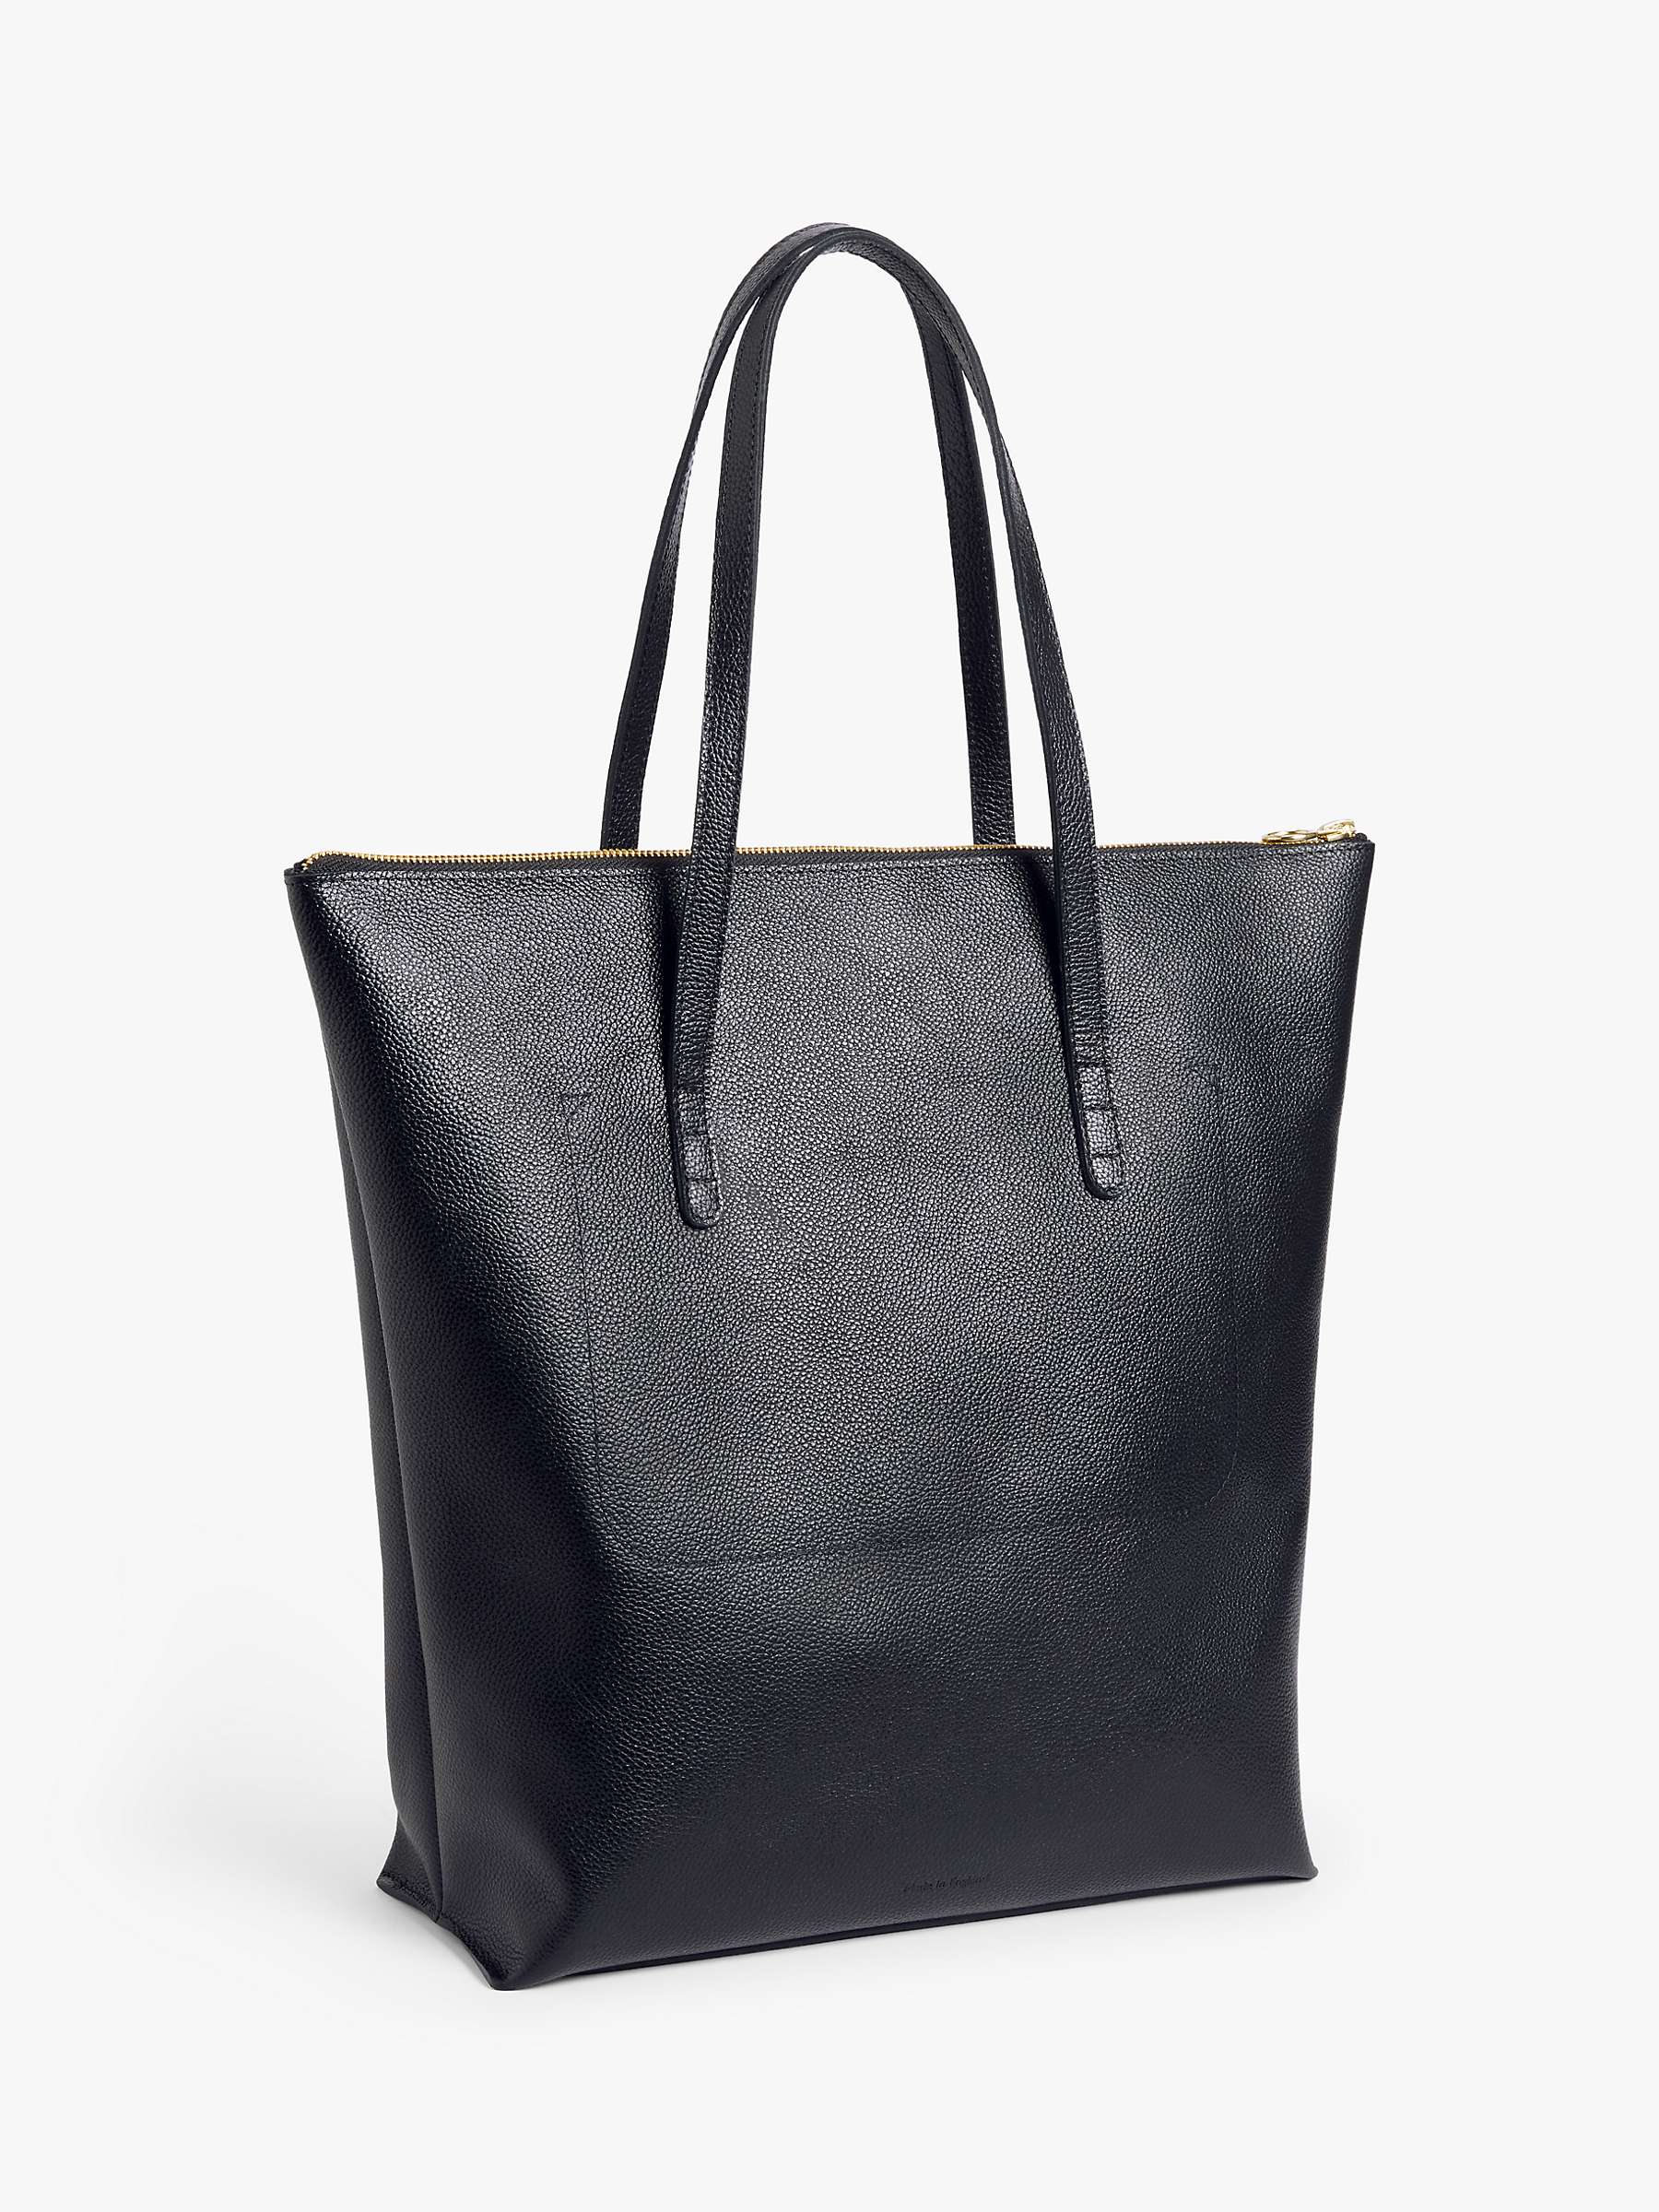 Buy Honey & Toast Gracie Leather Tote Bag Online at johnlewis.com